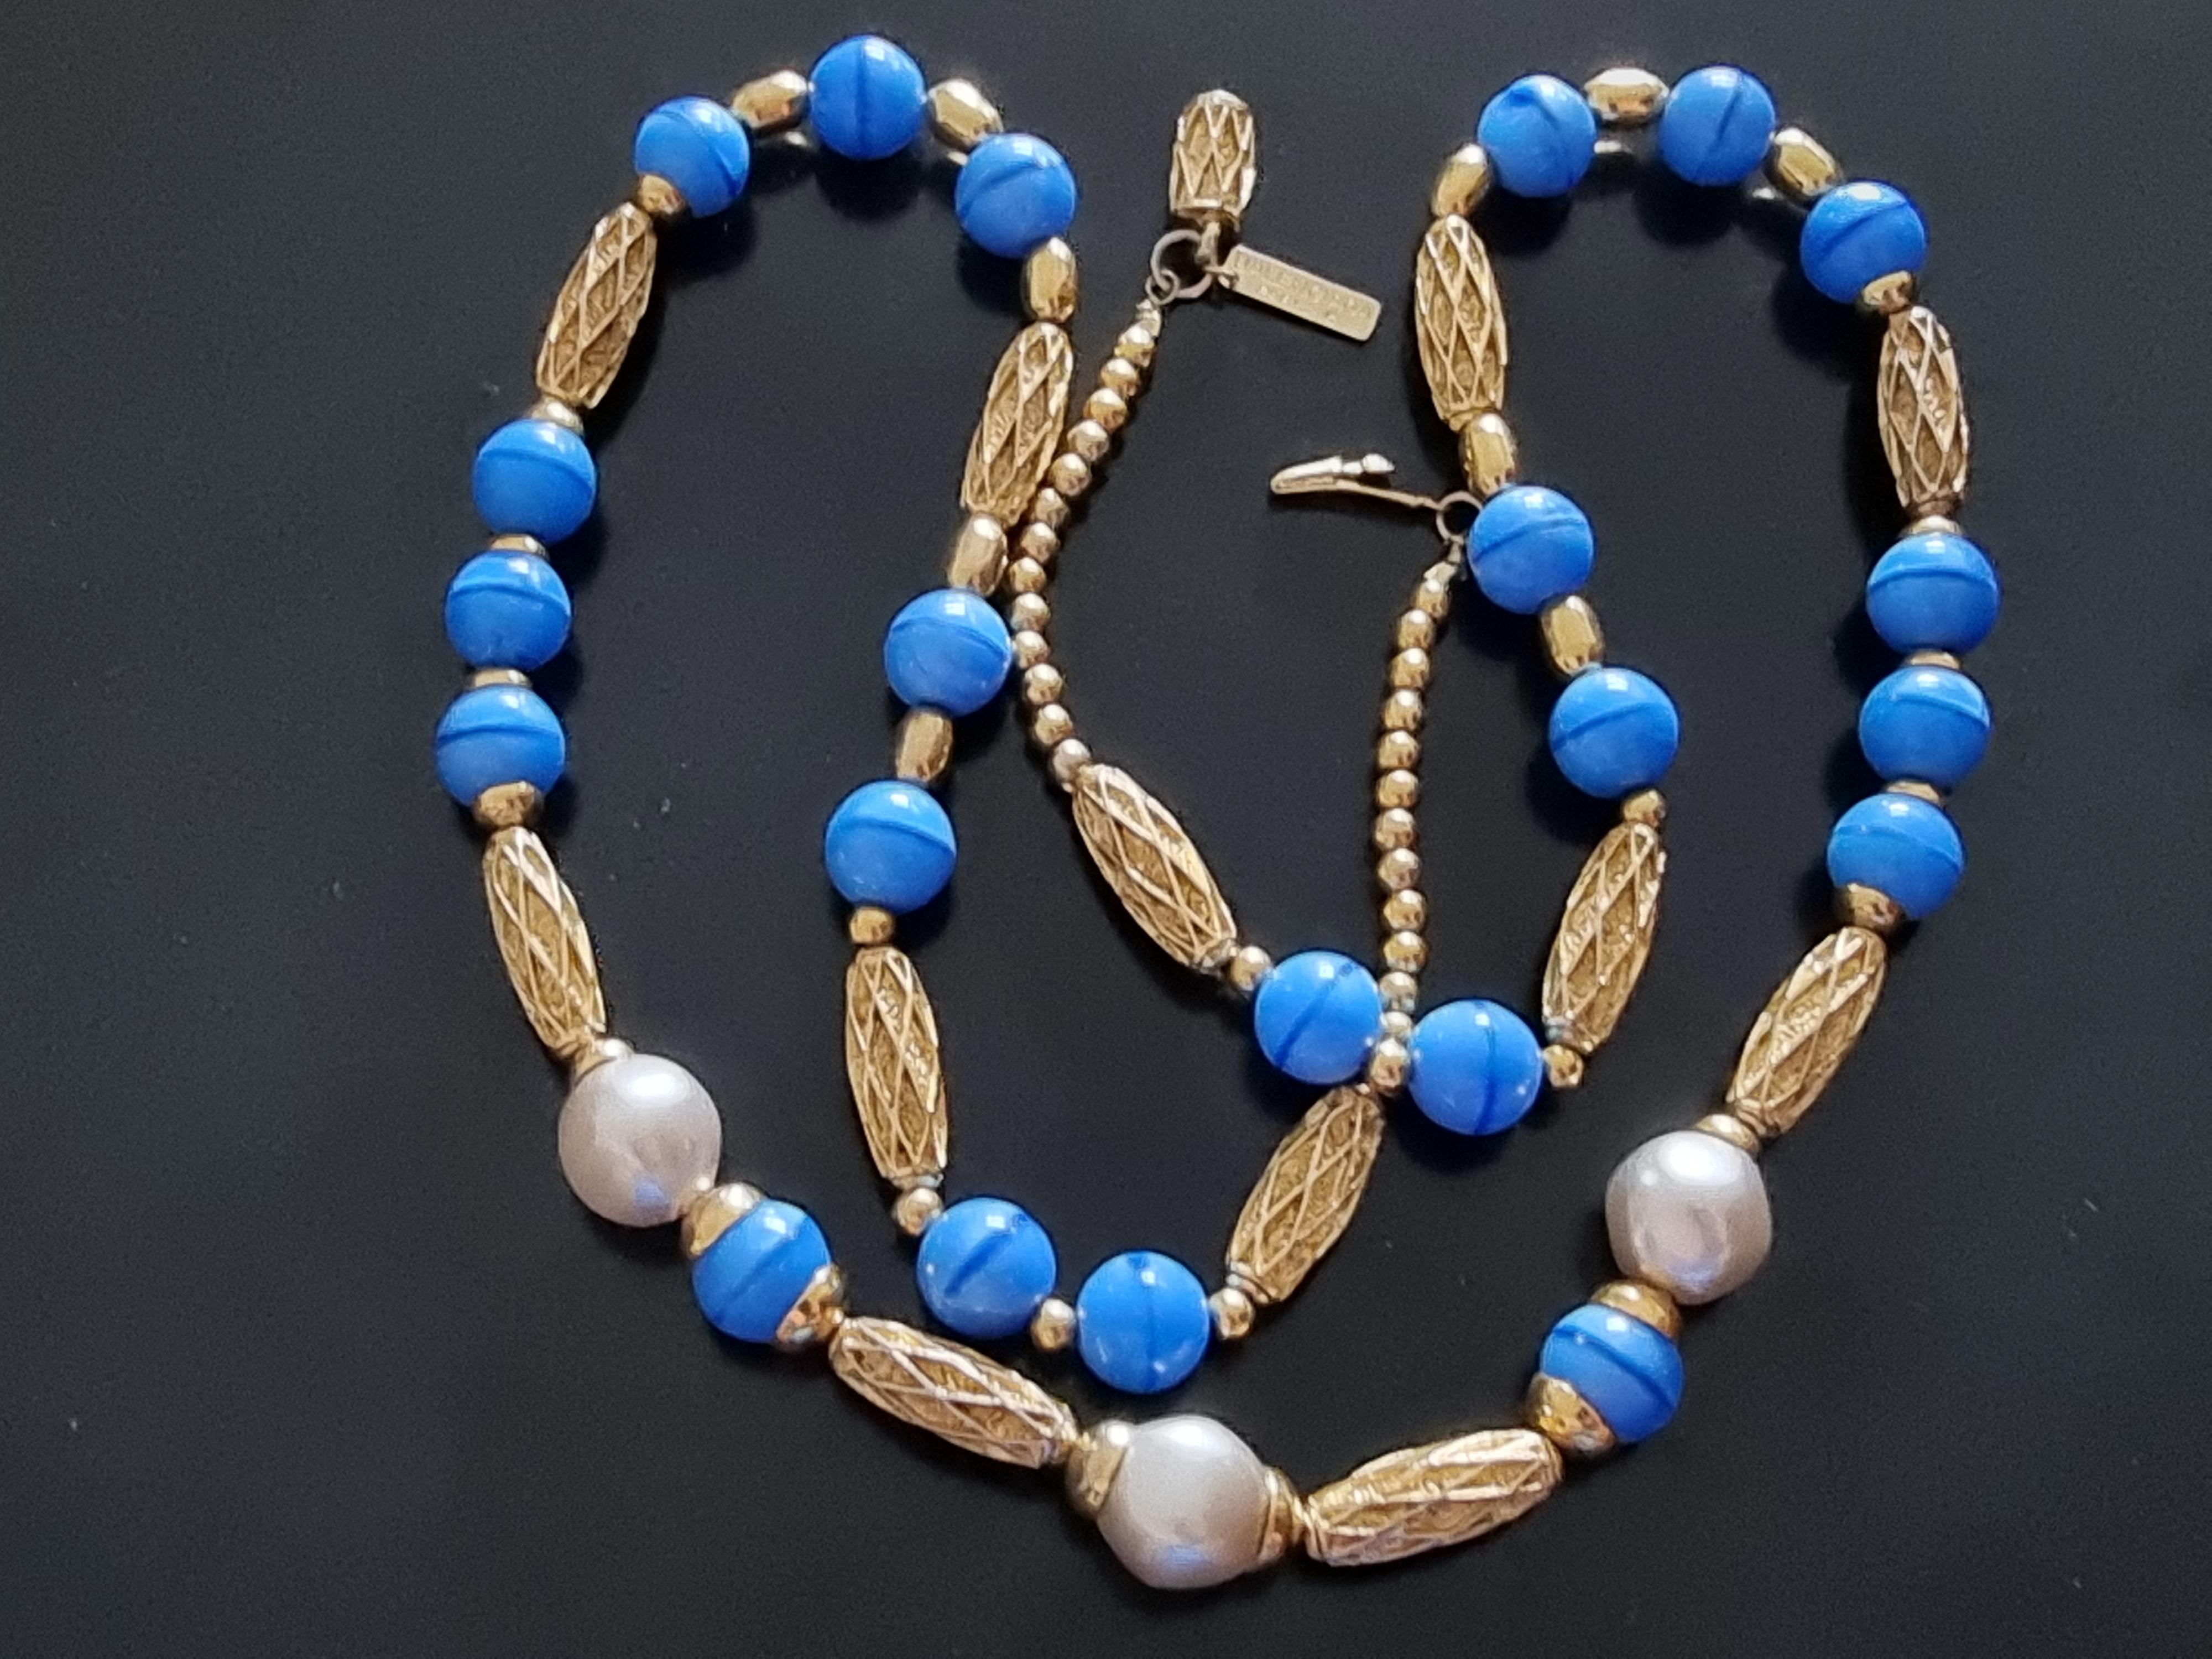 Sublime vintage NECKLACE,
in gilded metal adorned with glass beads,
by French haute couture designer BALENCIAGA,
sign,
total length 76 cm, weight 86 g,
good condition.


Born in a fishing village of Getaria, in the Spanish Basque Country, Cristóbal